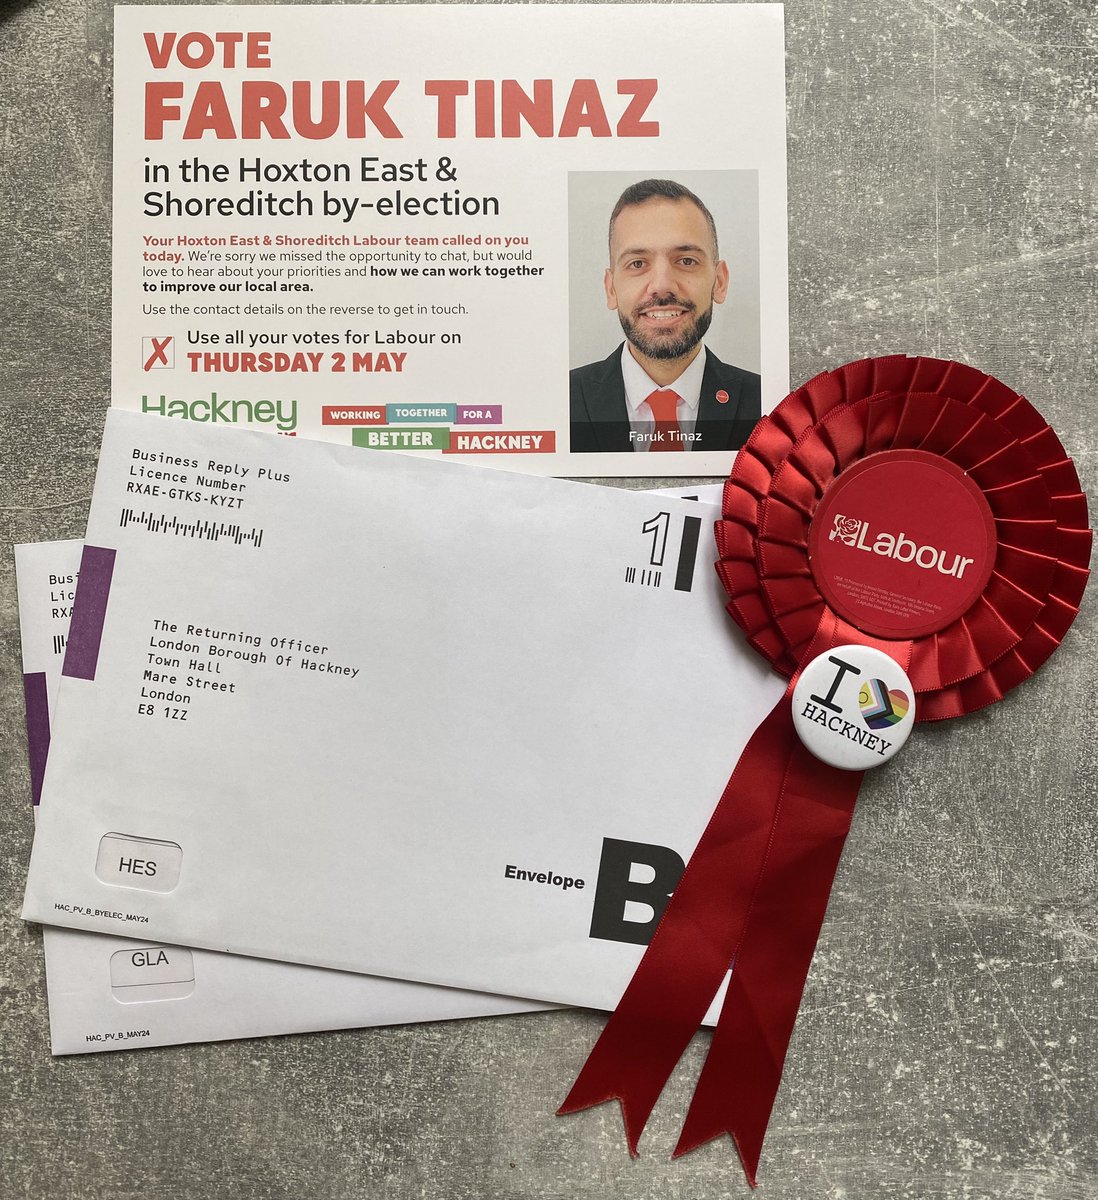 Have you received your postal vote? 

Use all your 4 🗳️ for #LabourParty🌹 

Hoxton East Cllr By-Election #VoteFaruk 🌹 
Mayor of London 
#VoteSadiq 🌹 
North East Assembly Member 
#VoteSem 🌹 
London Assembly Member 
#VoteLabour 🌹 

Send back your ✉️ 🗳️ ASAP!